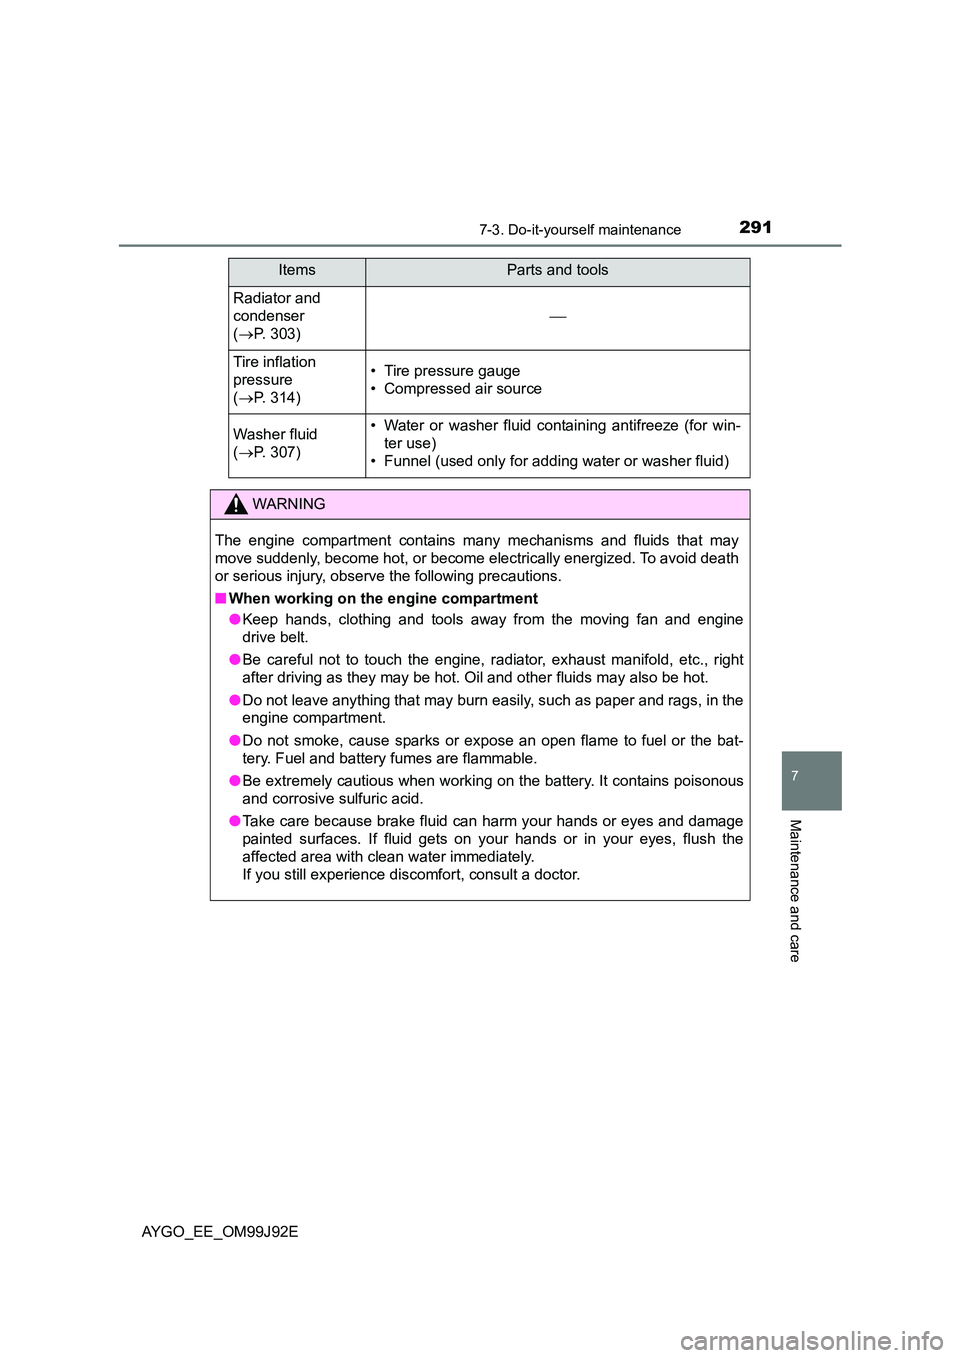 TOYOTA AYGO 2015  Owners Manual (in English) 2917-3. Do-it-yourself maintenance
7
Maintenance and care
AYGO_EE_OM99J92E
Radiator and  
condenser  
( →P. 303)

Tire inflation  
pressure 
( →P. 314)
• Tire pressure gauge 
• Compressed a